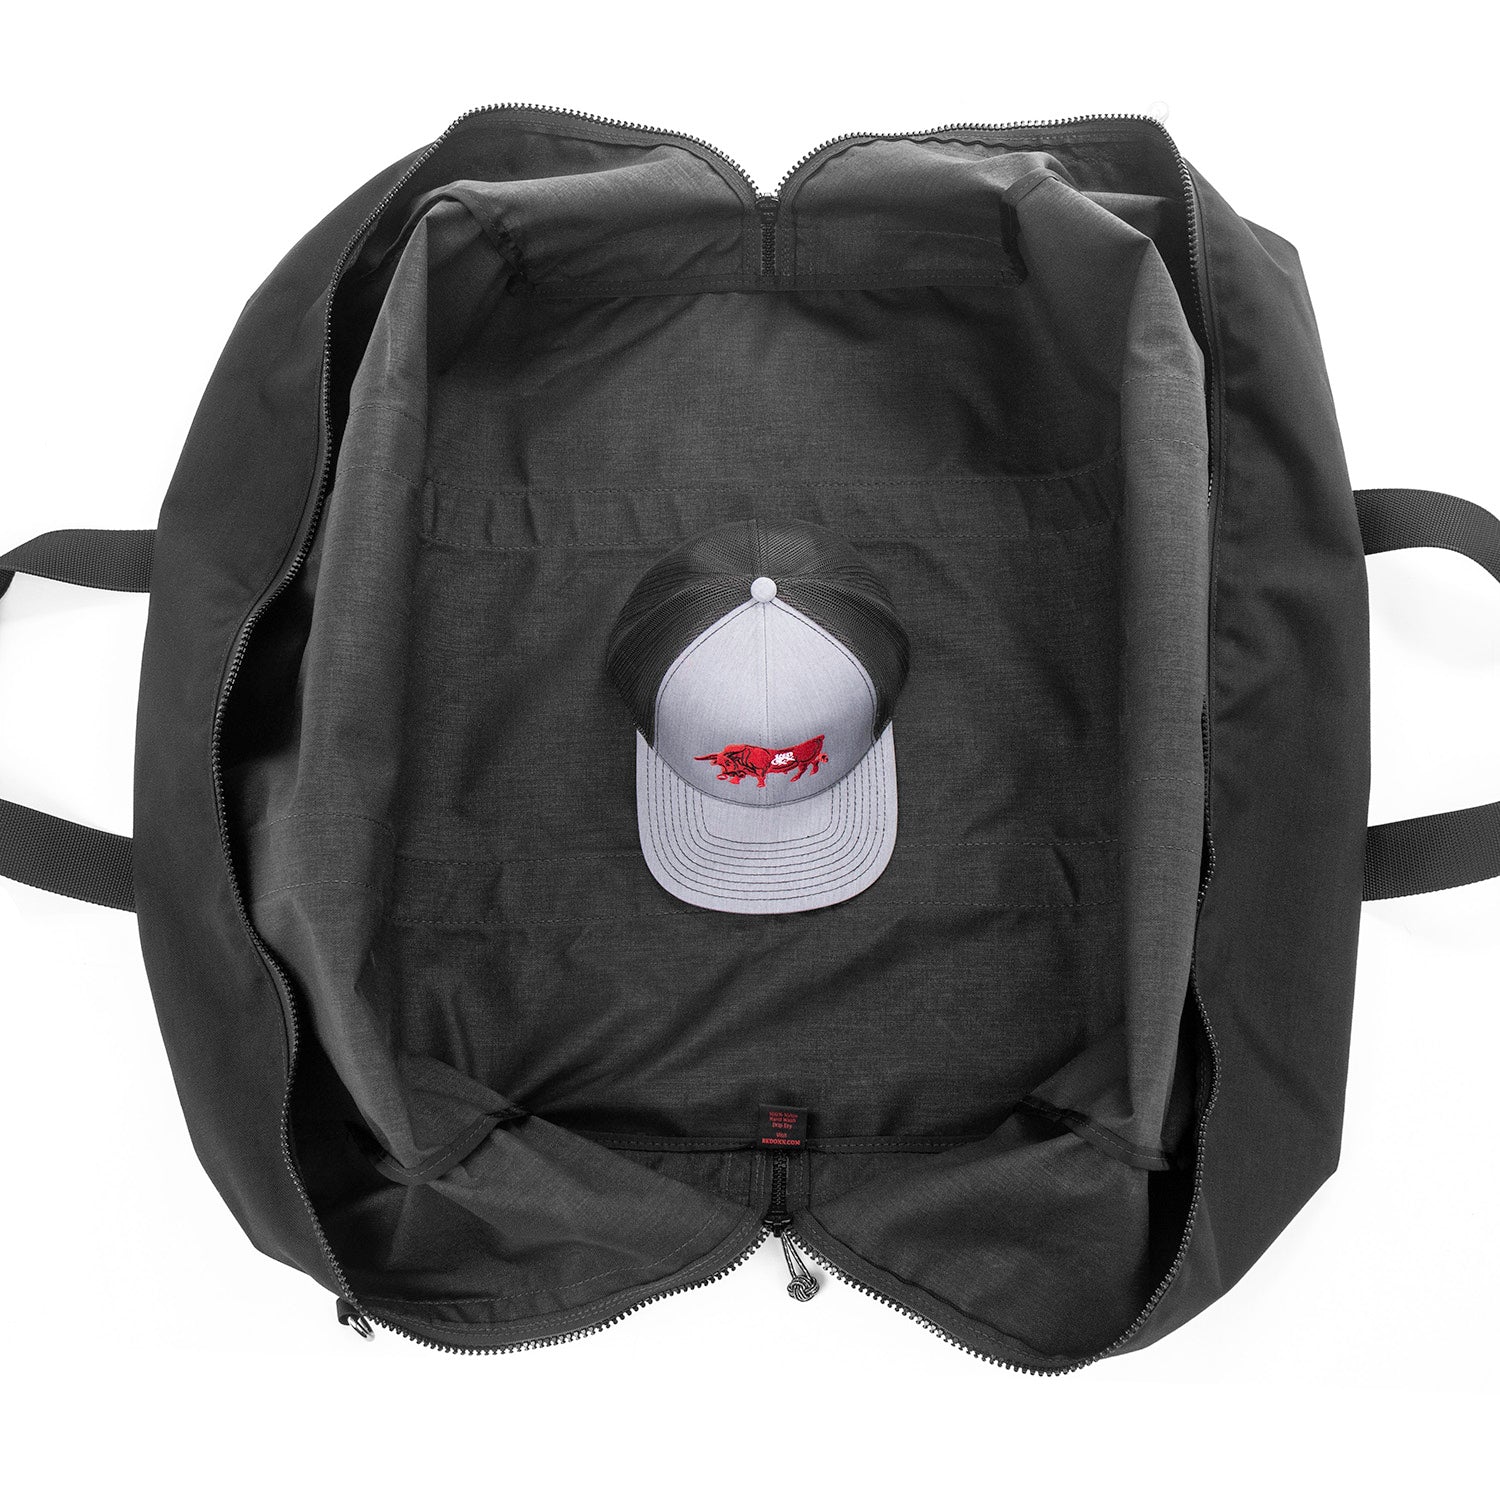 Large Aviator Kit Bag with Hat to show scale, bag is all the way open. 